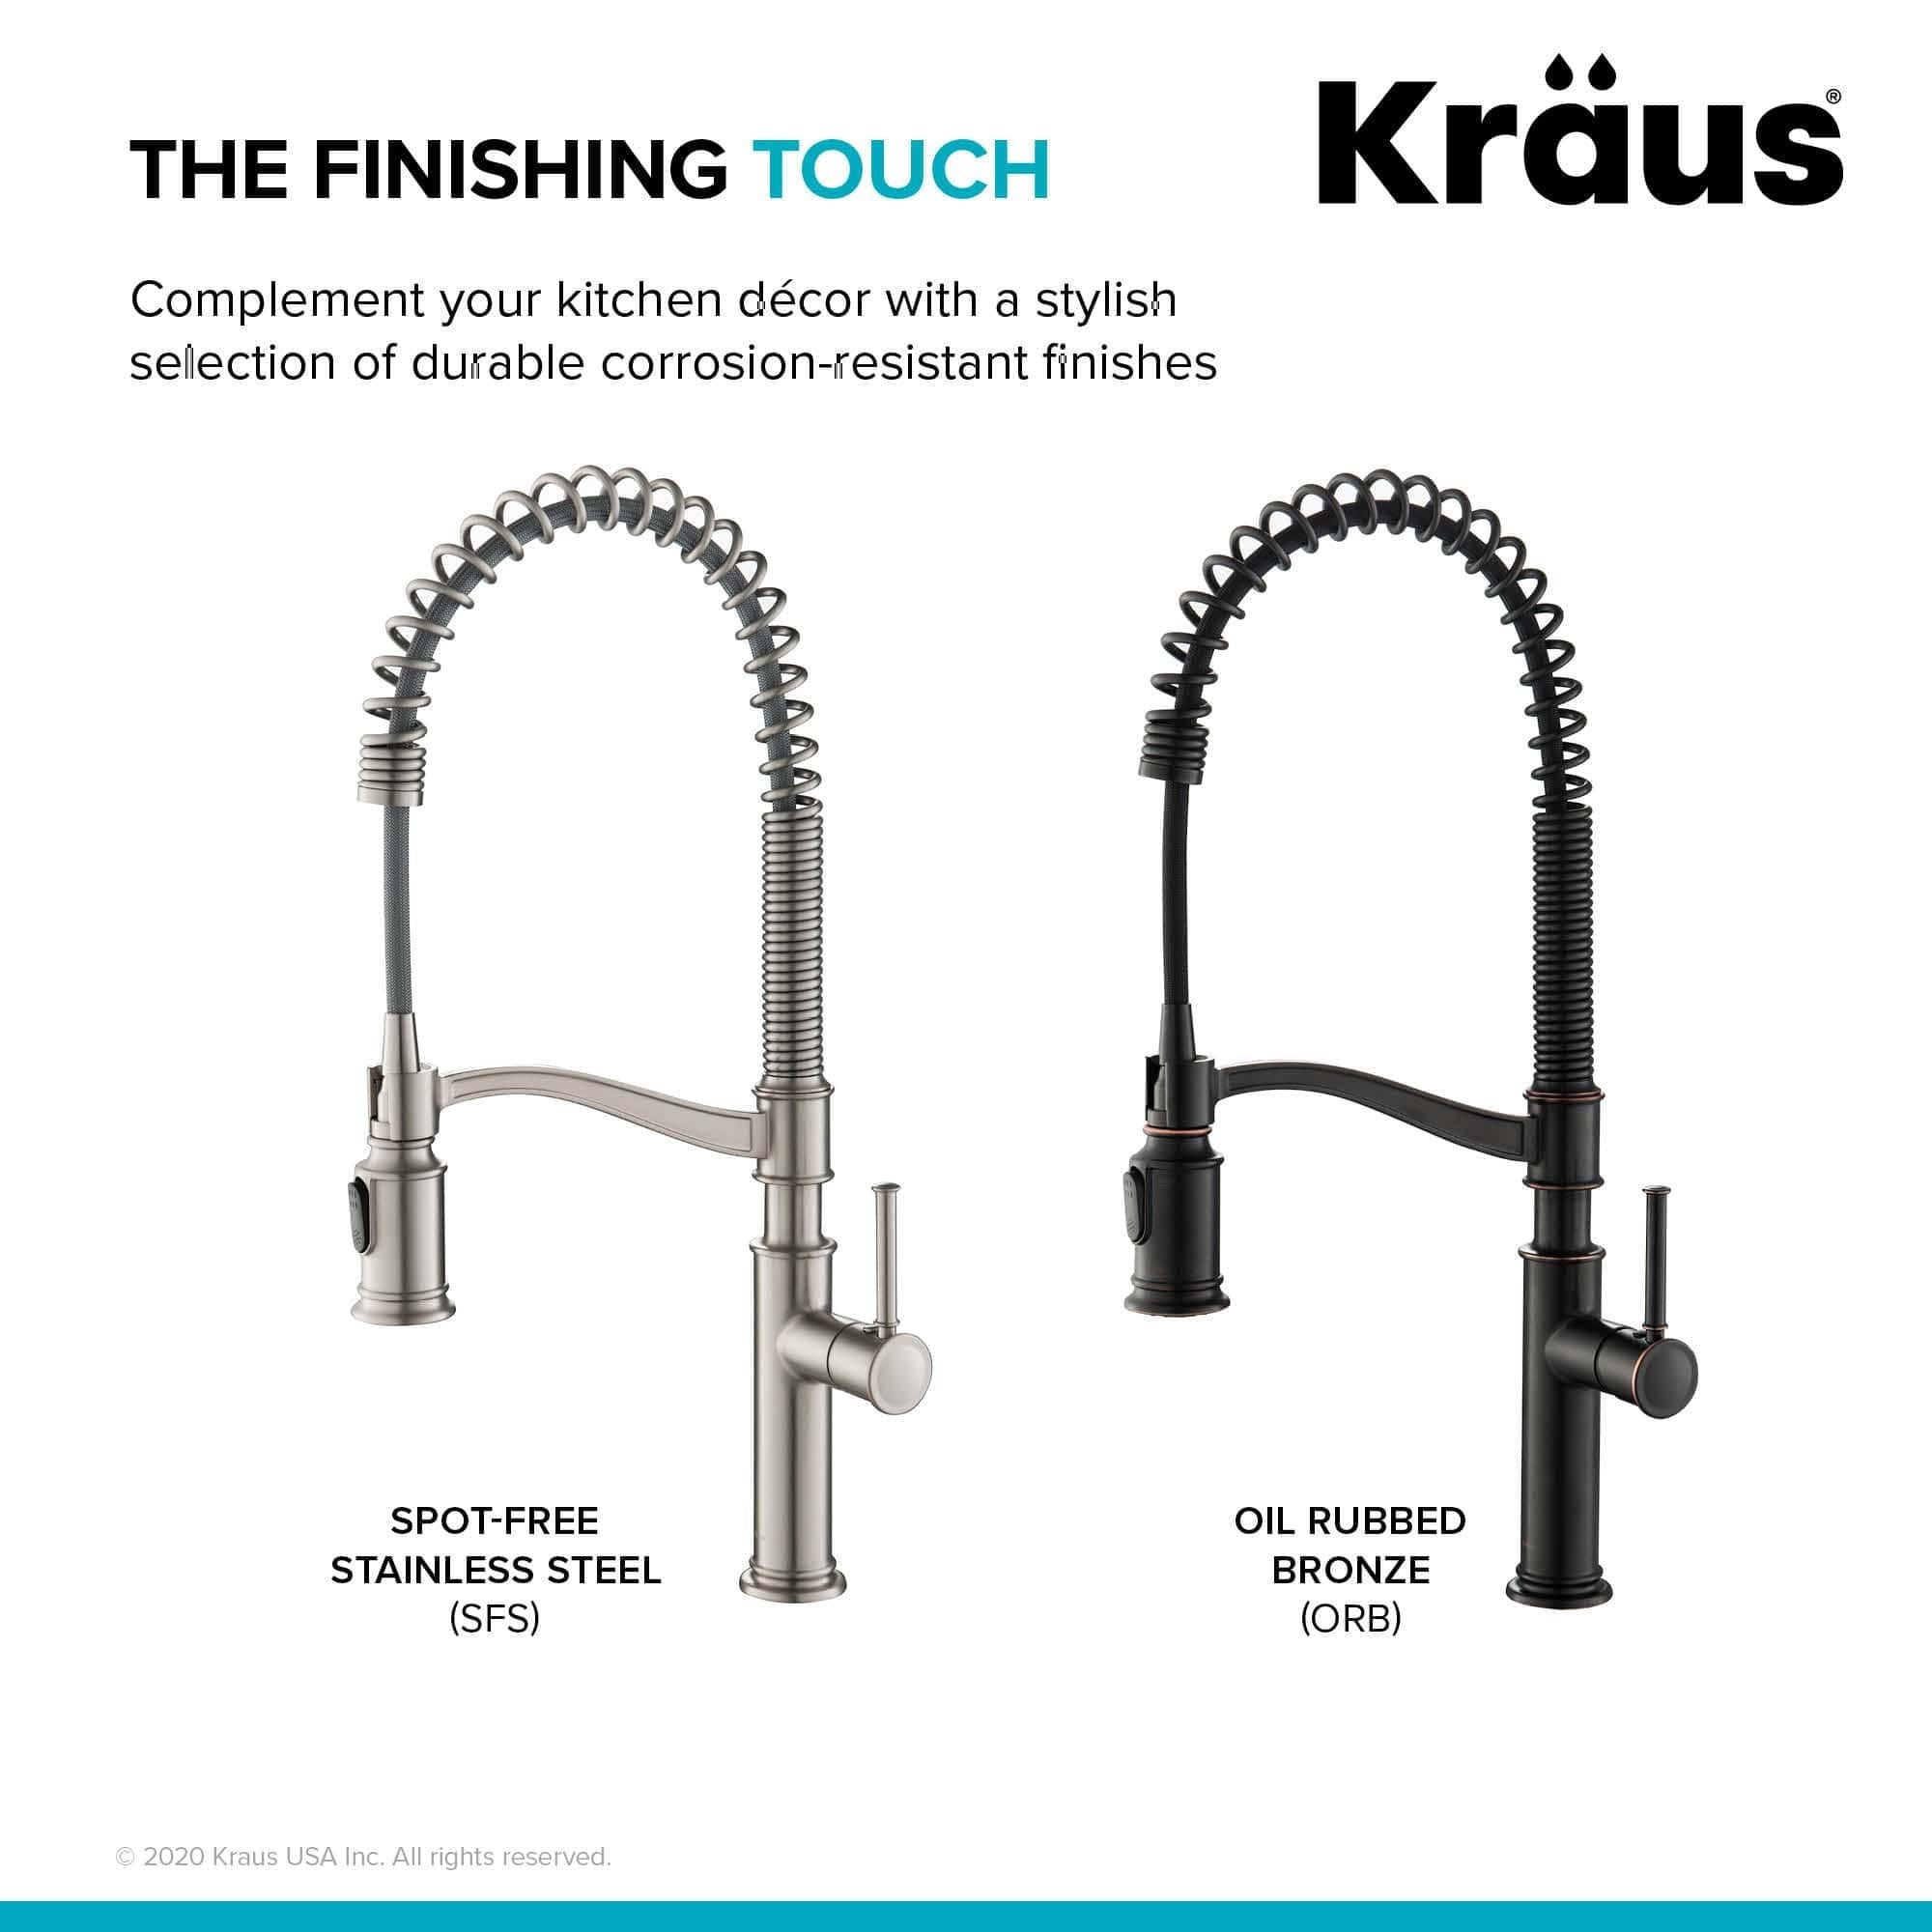 KRAUS Sellette Commercial Style Pull-Down Kitchen Faucet in Spot Free Stainless Steel